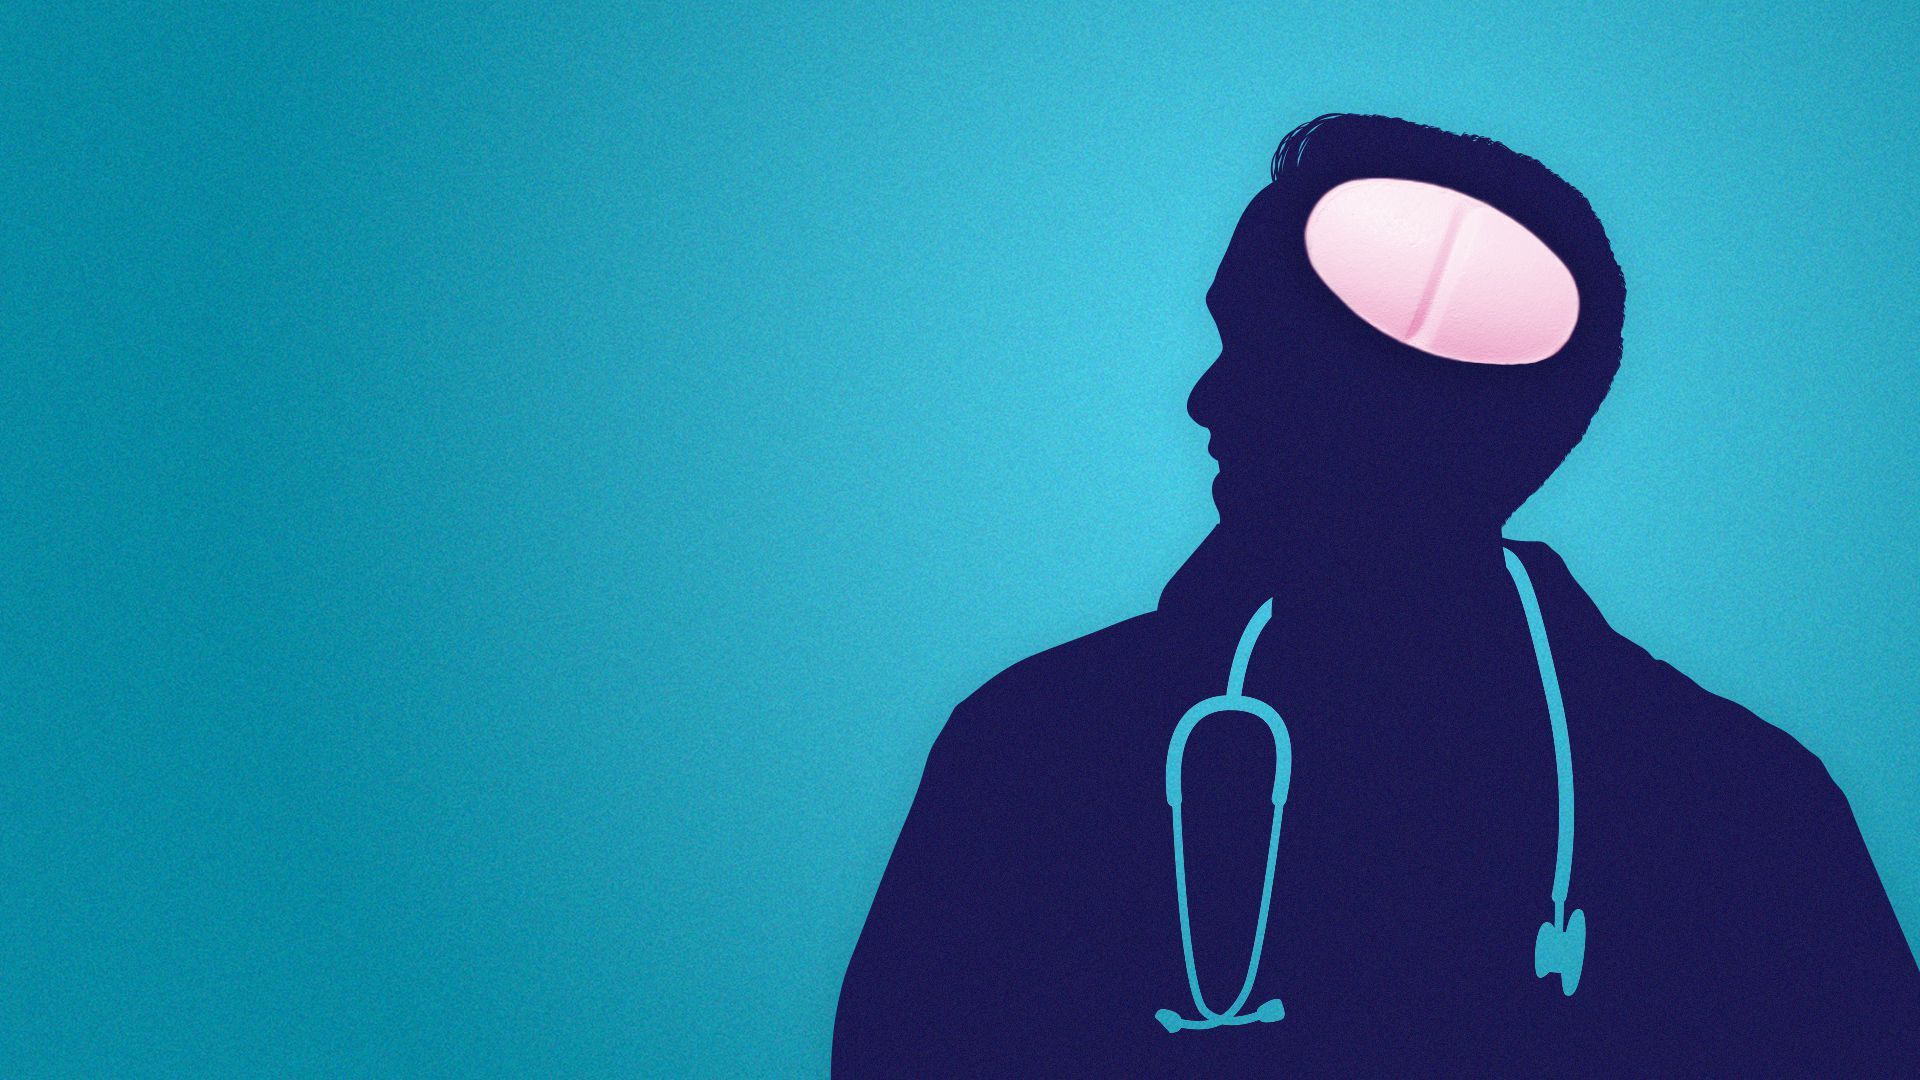 Illustration of a silhouette of a physician with a pill-shaped brain.